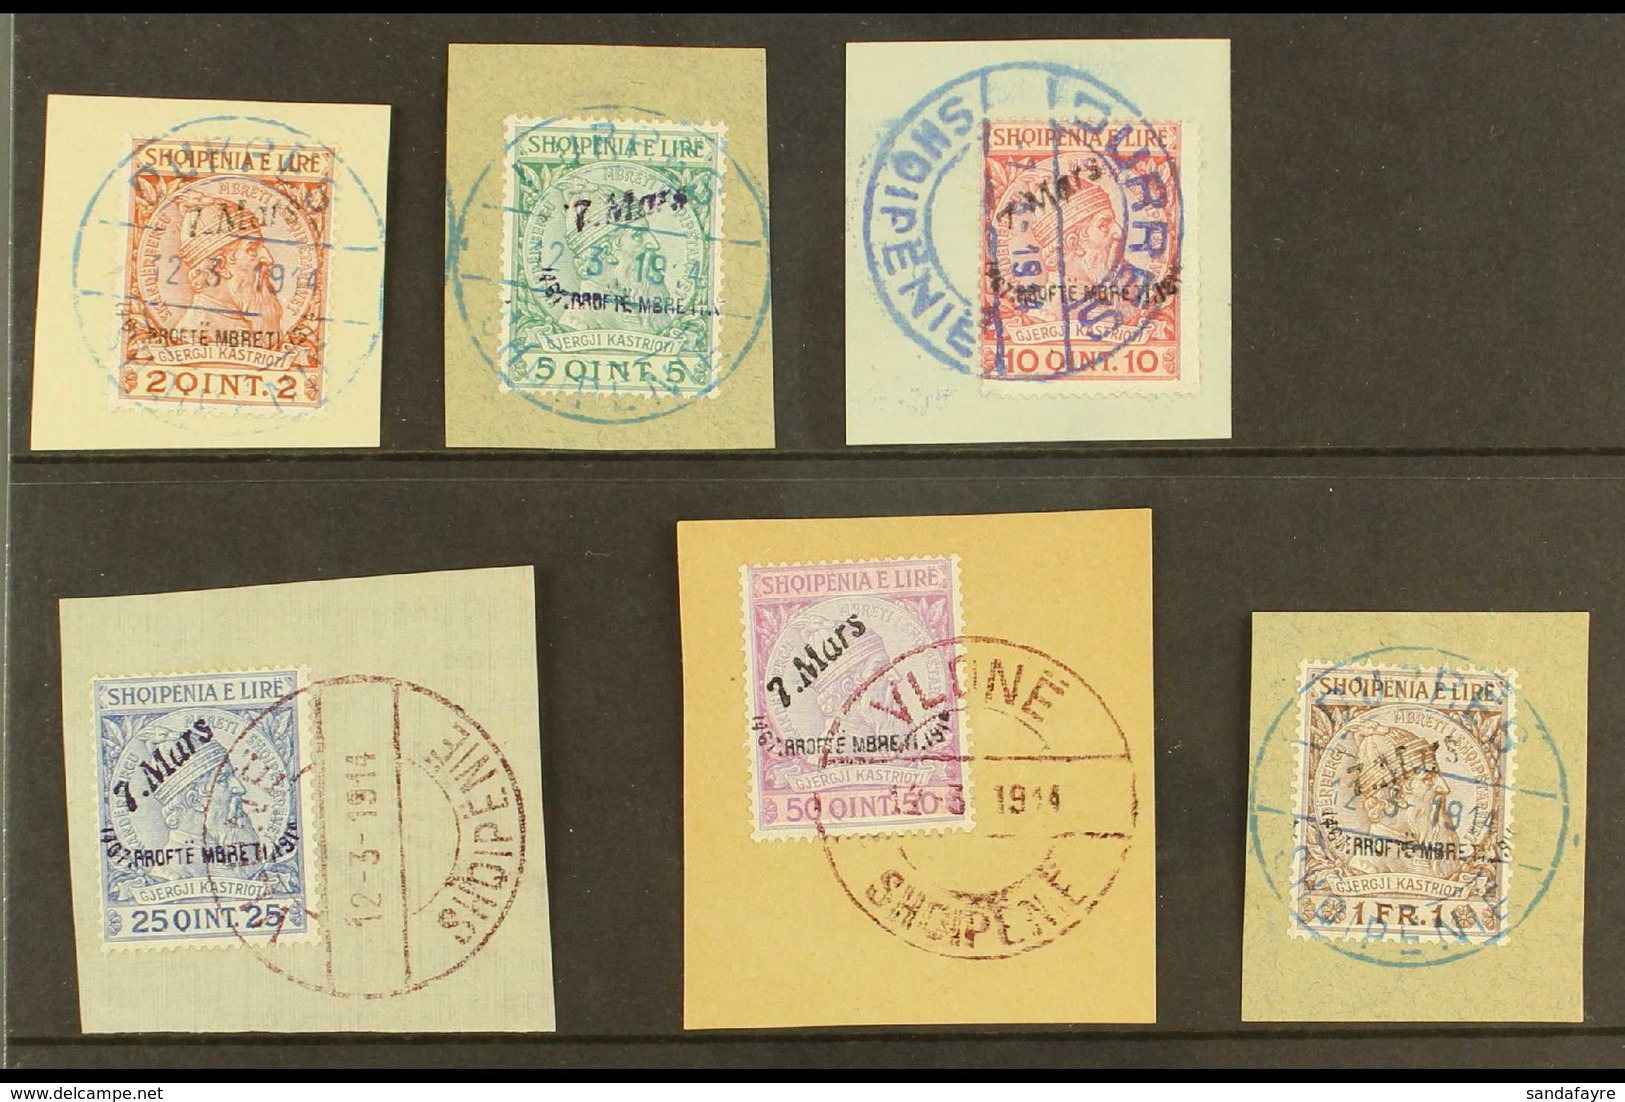 1914 "ON PIECE" SET Arrival Of Prince Handstamps Complete Set (SG 33/38, Michel 35/40), Very Fine Used On Pieces Tied By - Albanie